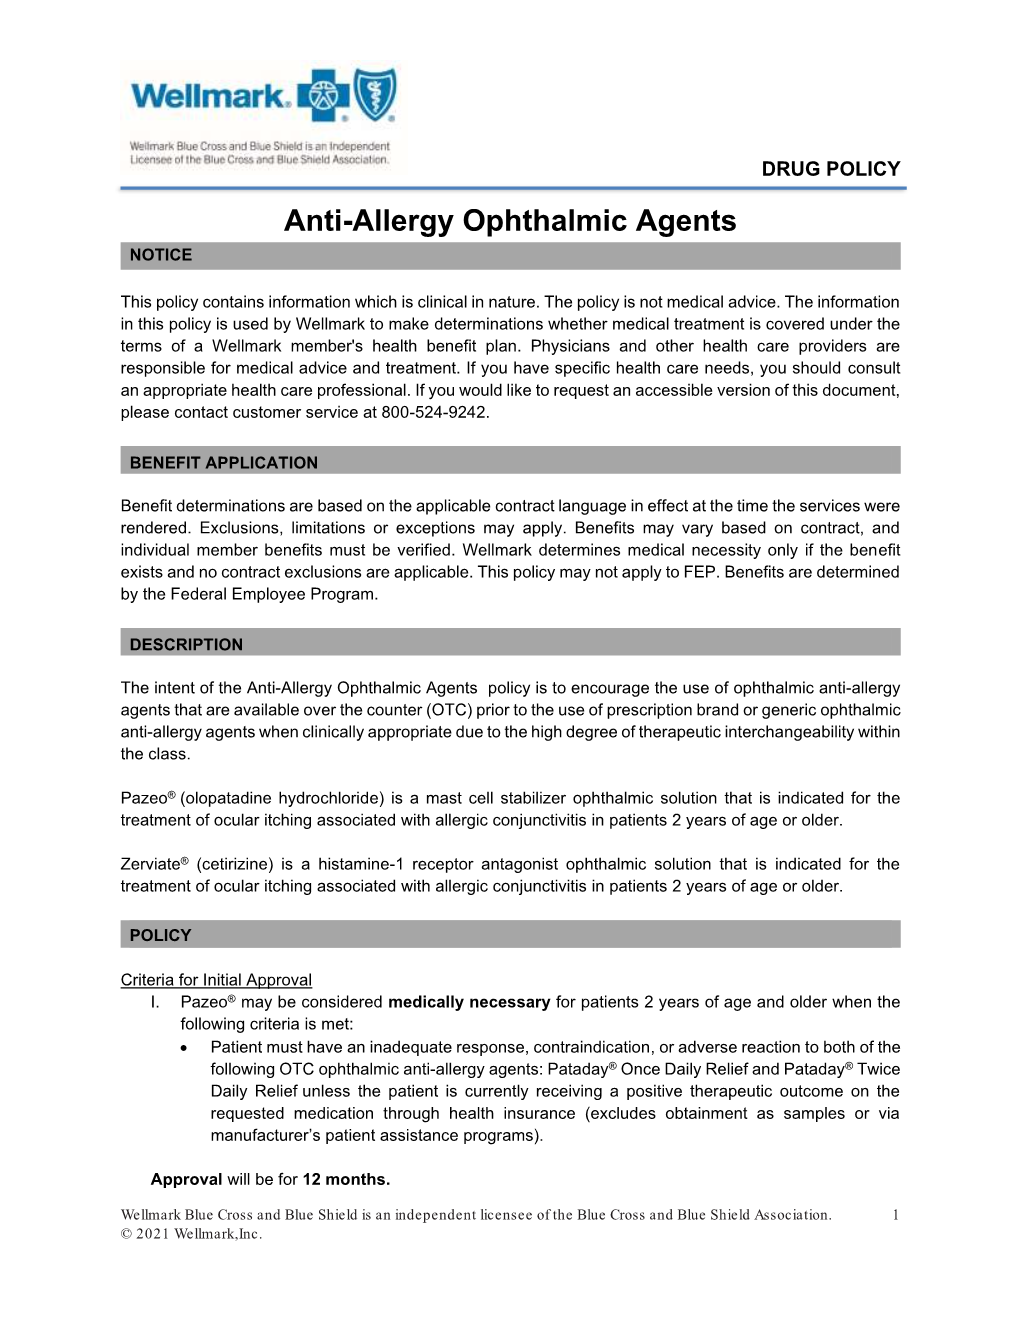 Anti-Allergy Ophthalmic Agents NOTICE